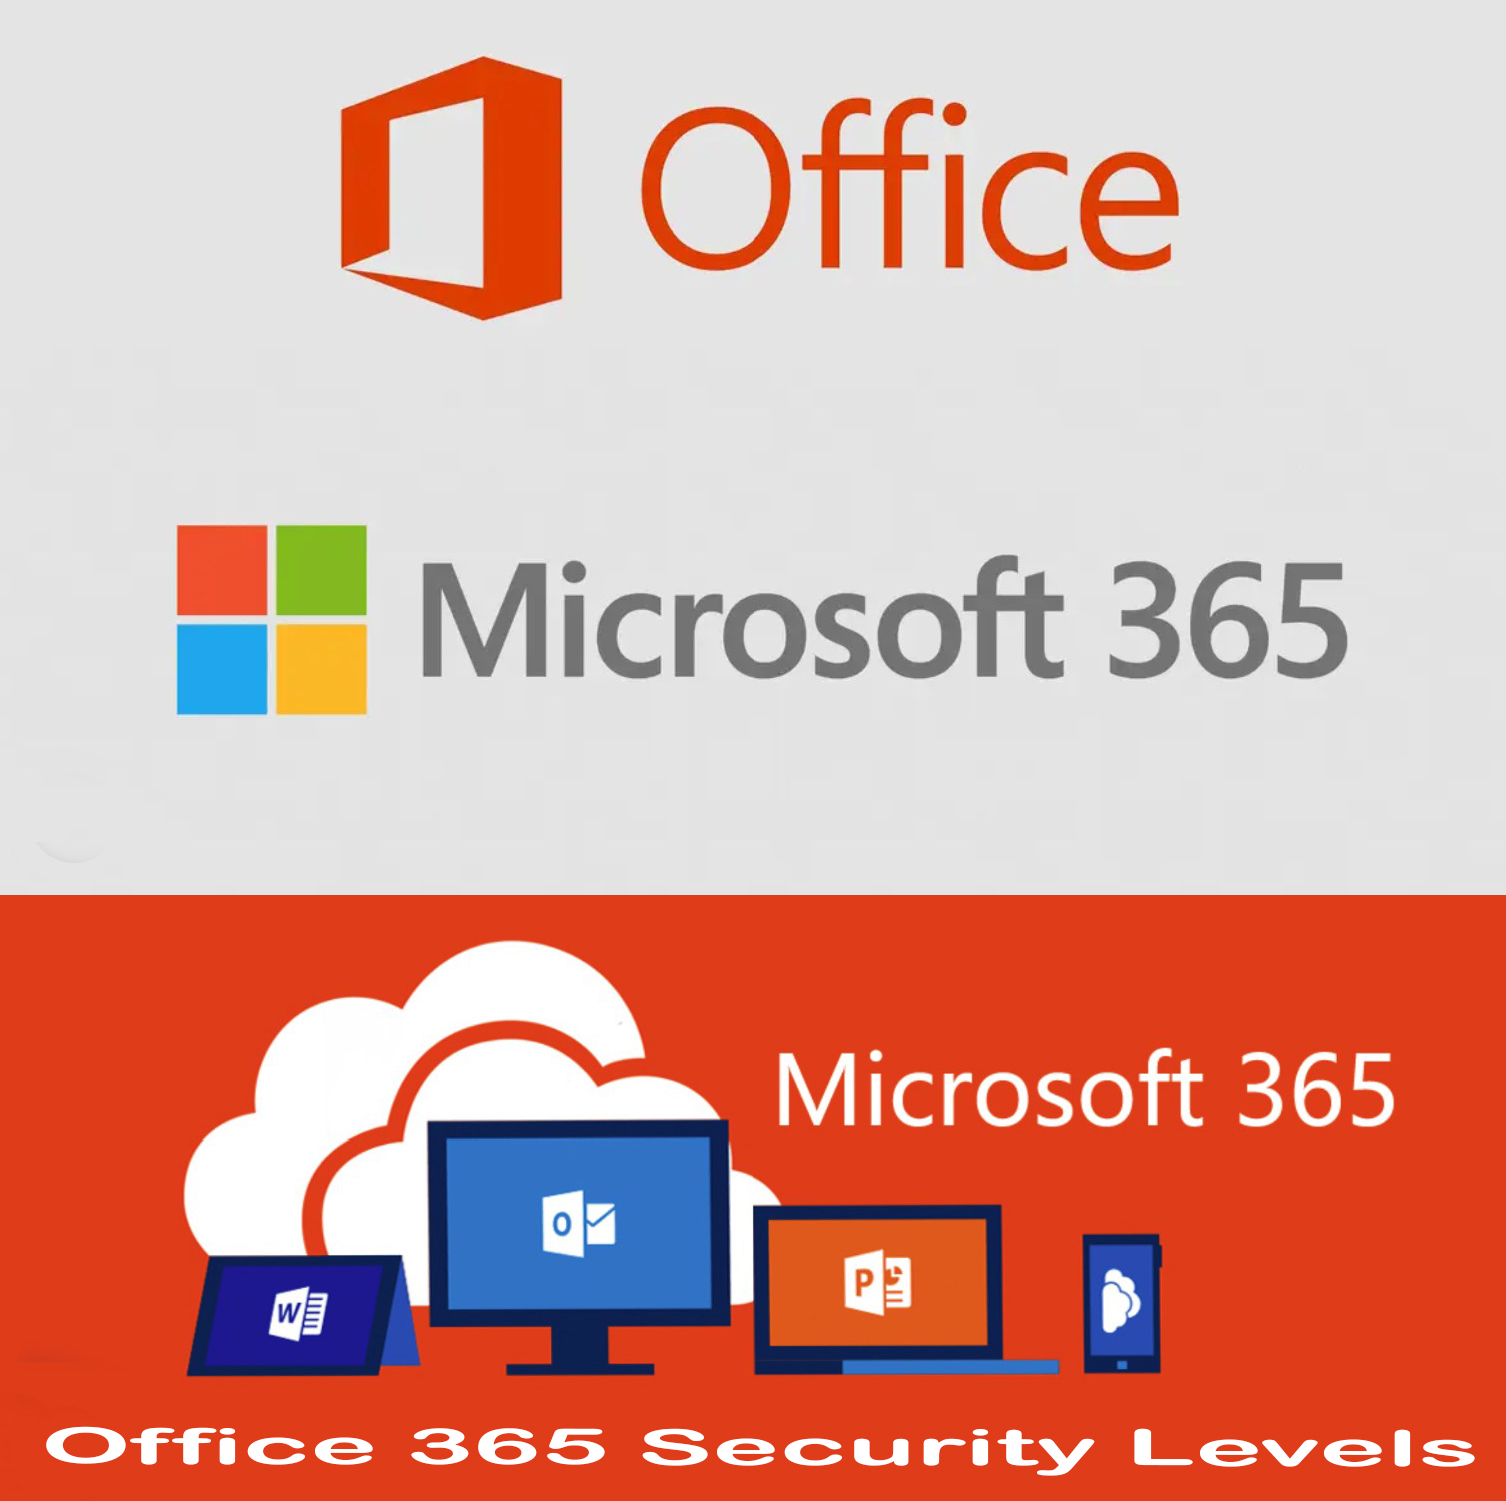 Office 365 Security Levels